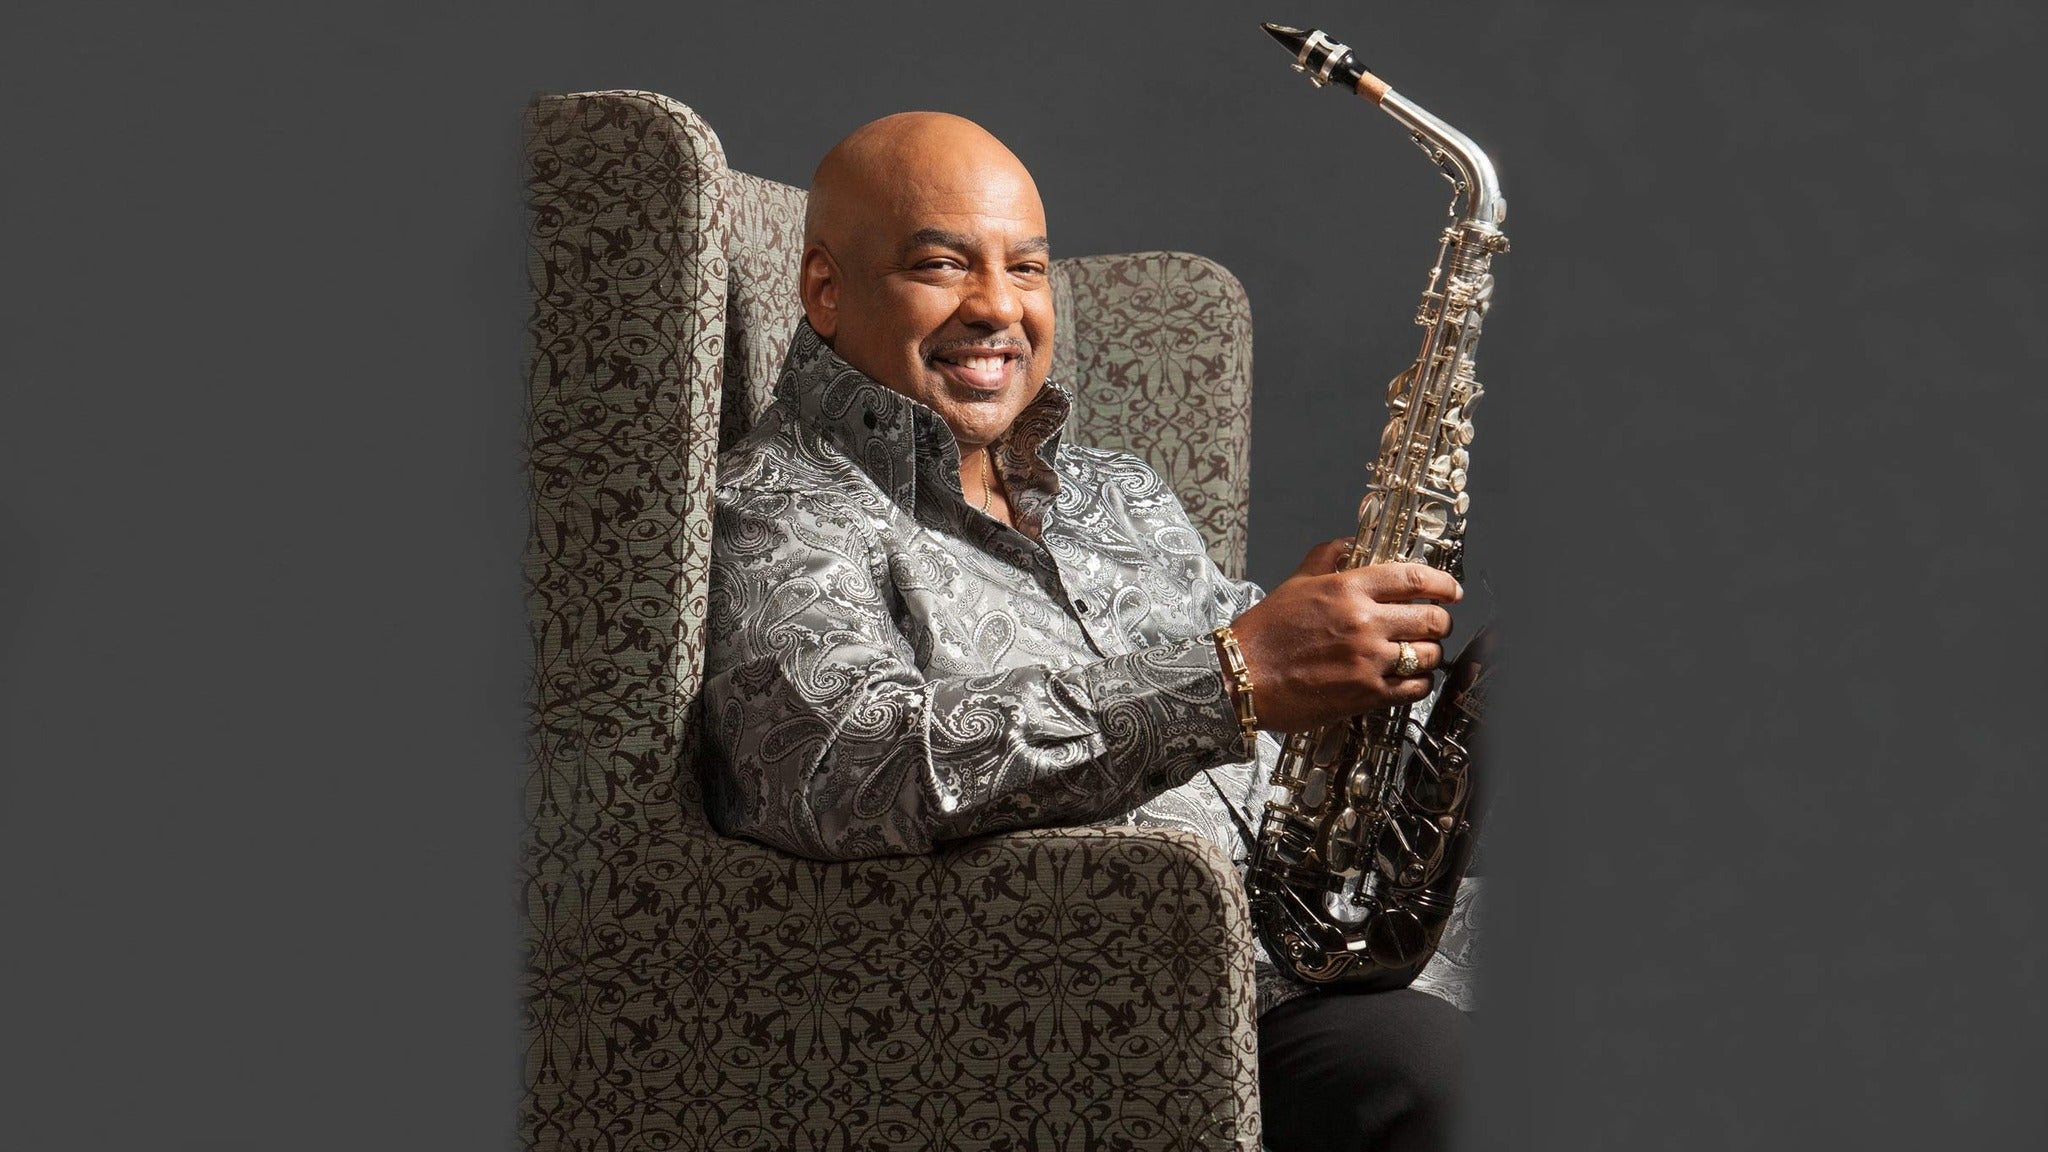 DABO Presents To Jazz with Love featuring Gerald Albright/Andre Ward